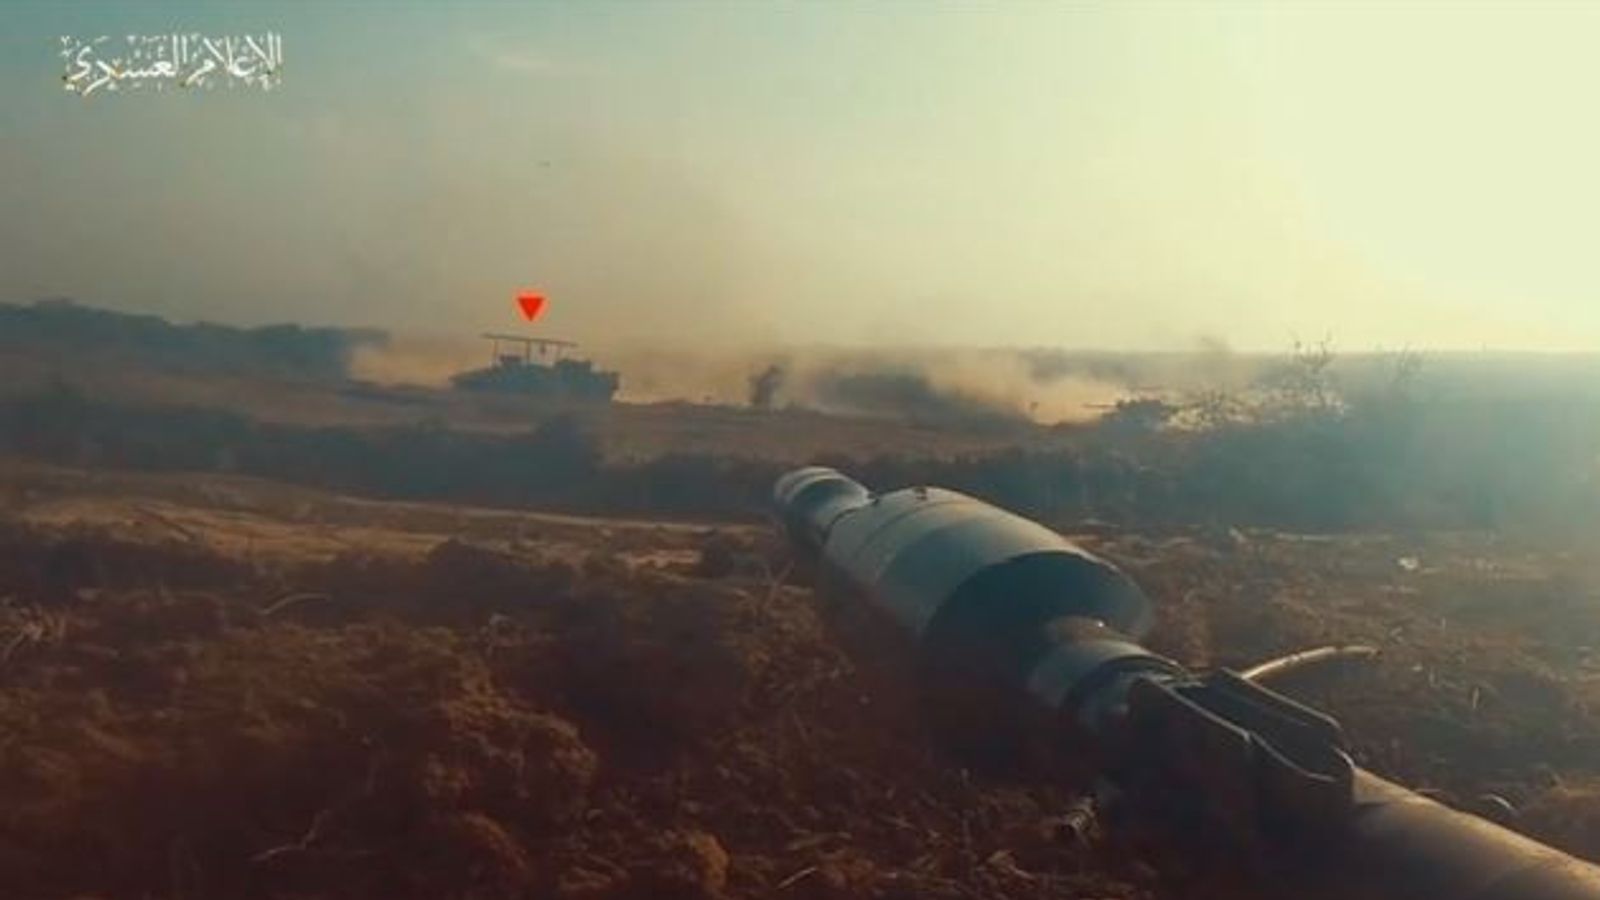 Israel-Gaza war: New Hamas video purportedly shows militants targeting tank as official warns of more 7 October-style attacks